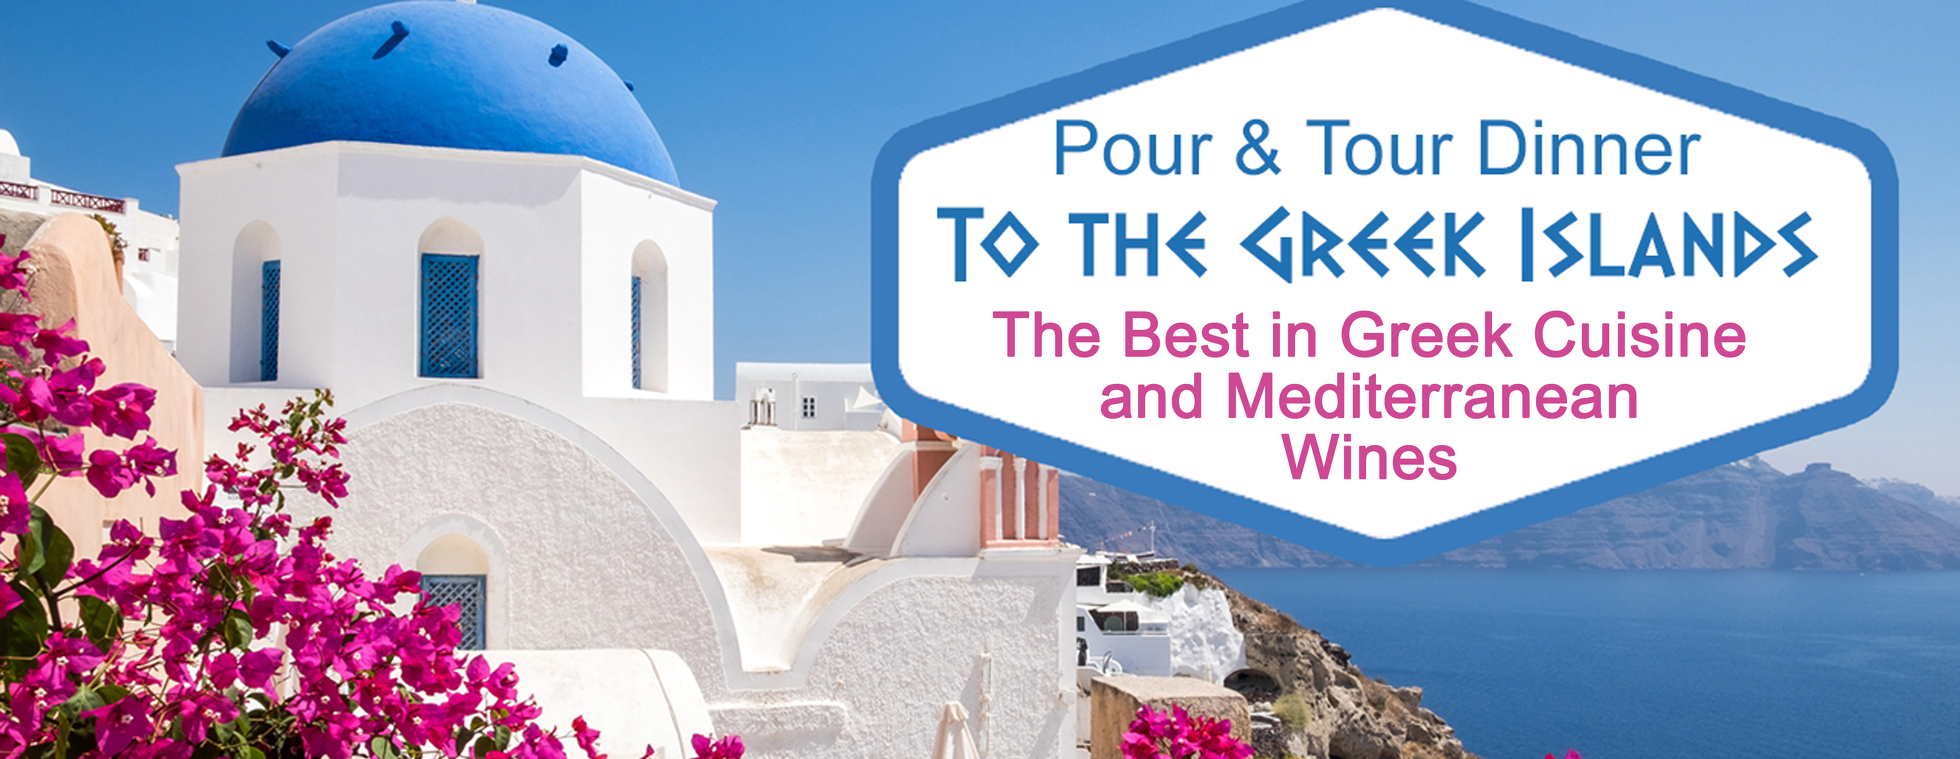 Pour & Tour Dinner to the Greek Islands